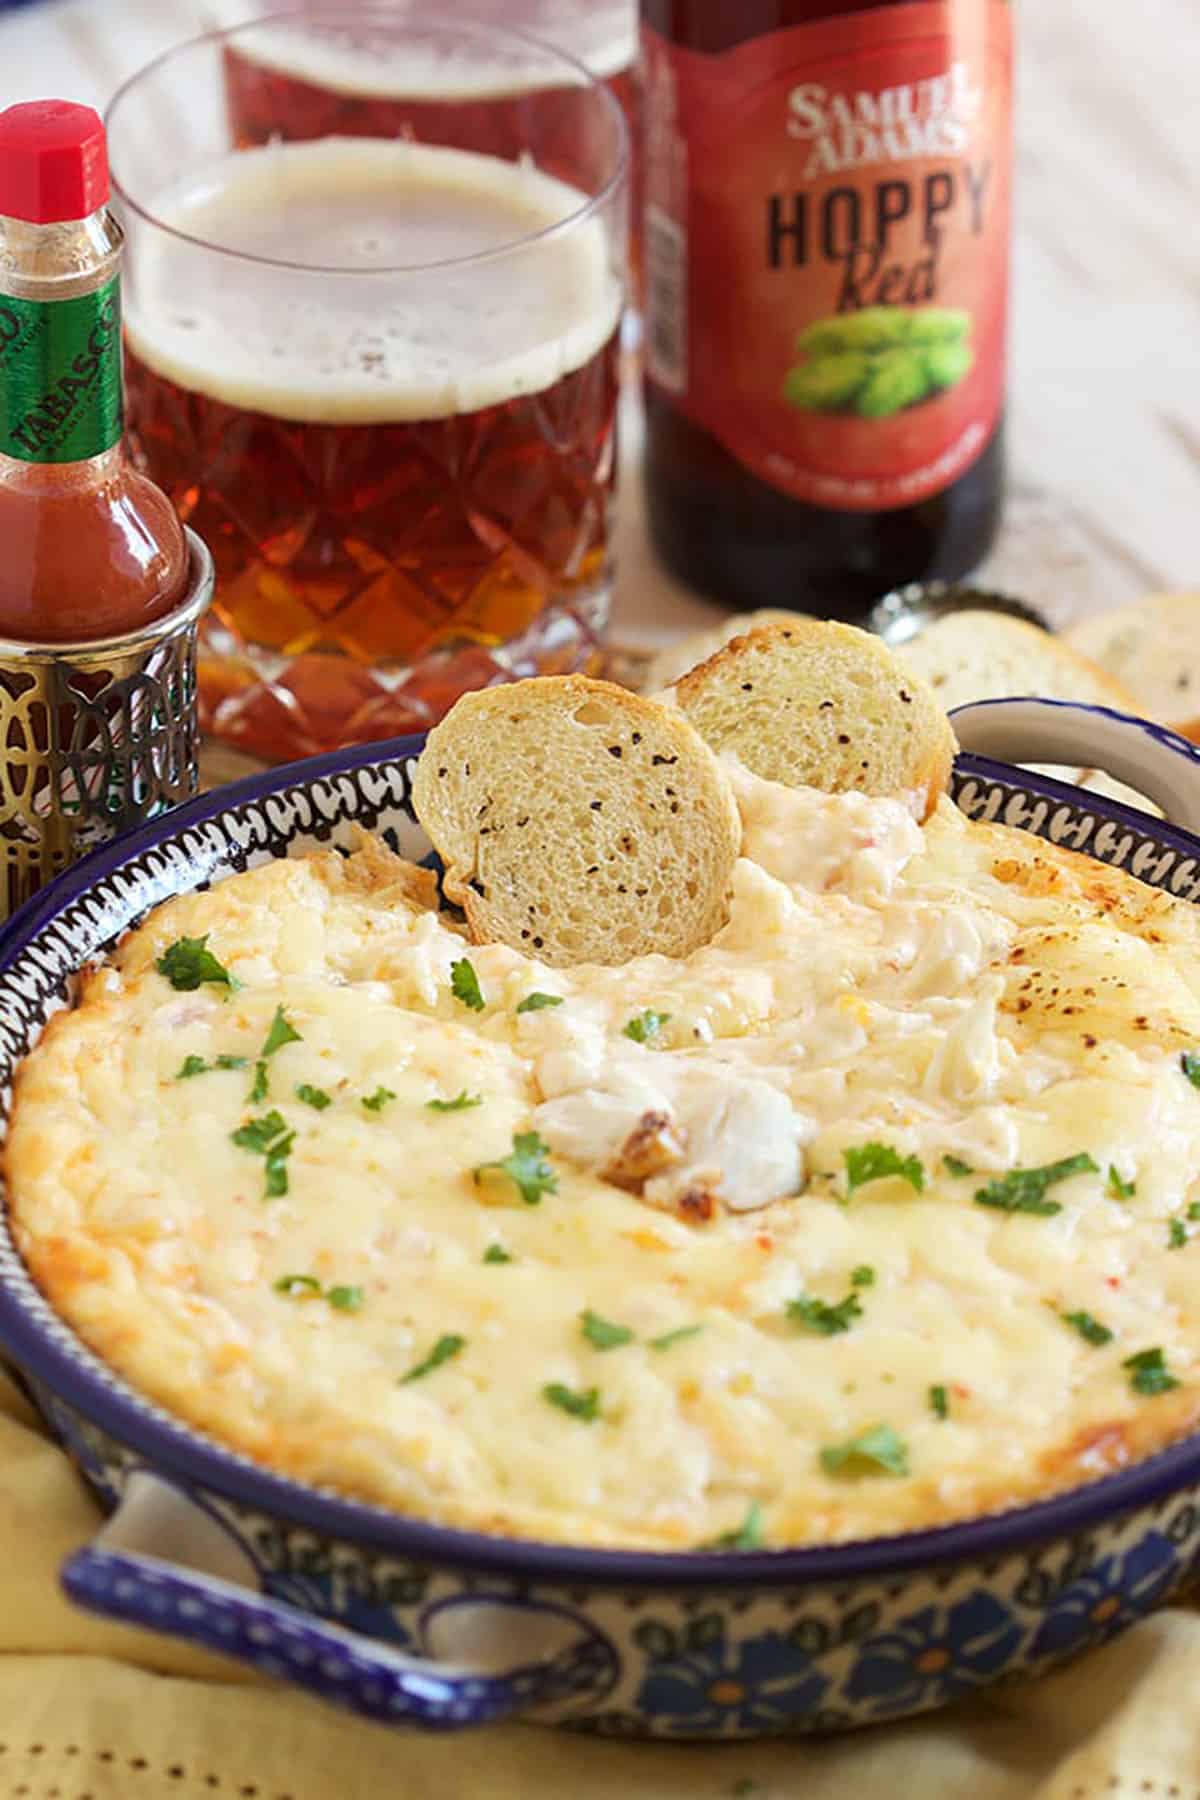 Crab Dip in a polish pottery baking dish with a glass of beer and a bottle of hot sauce in the background.